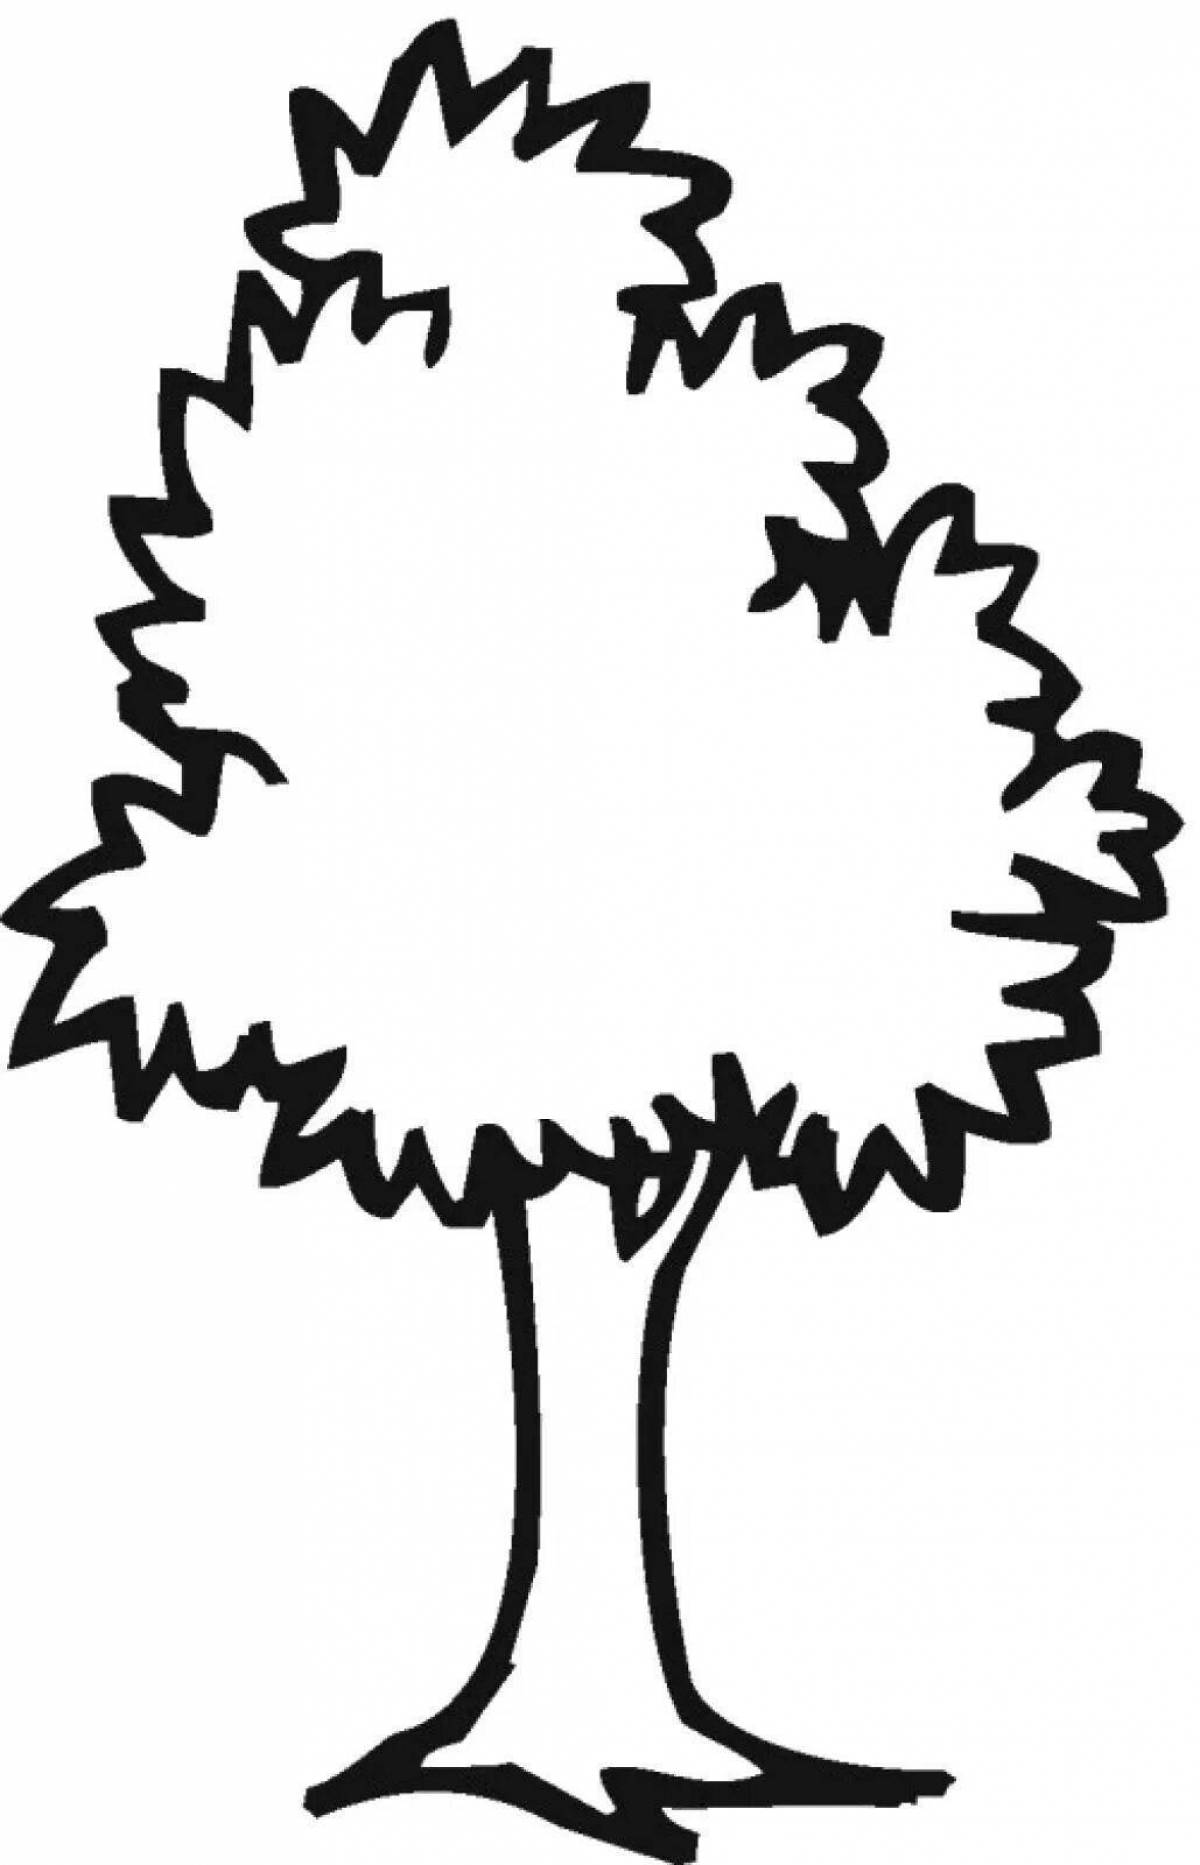 Coloring book gorgeous tree silhouette